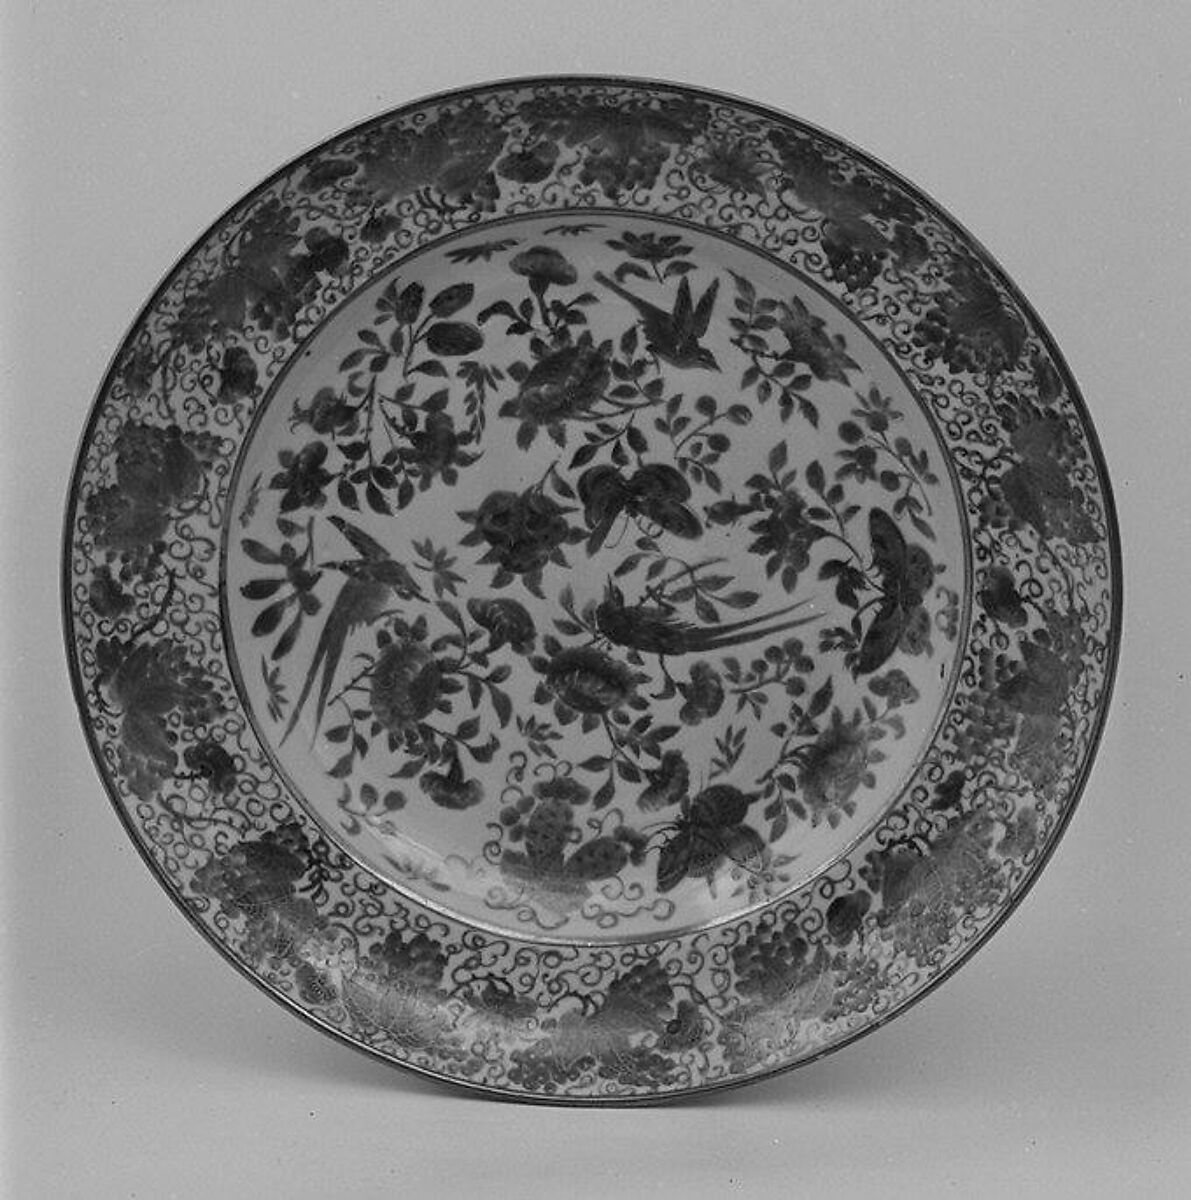 Soup plate, Hard-paste porcelain, Chinese, probably for American market 